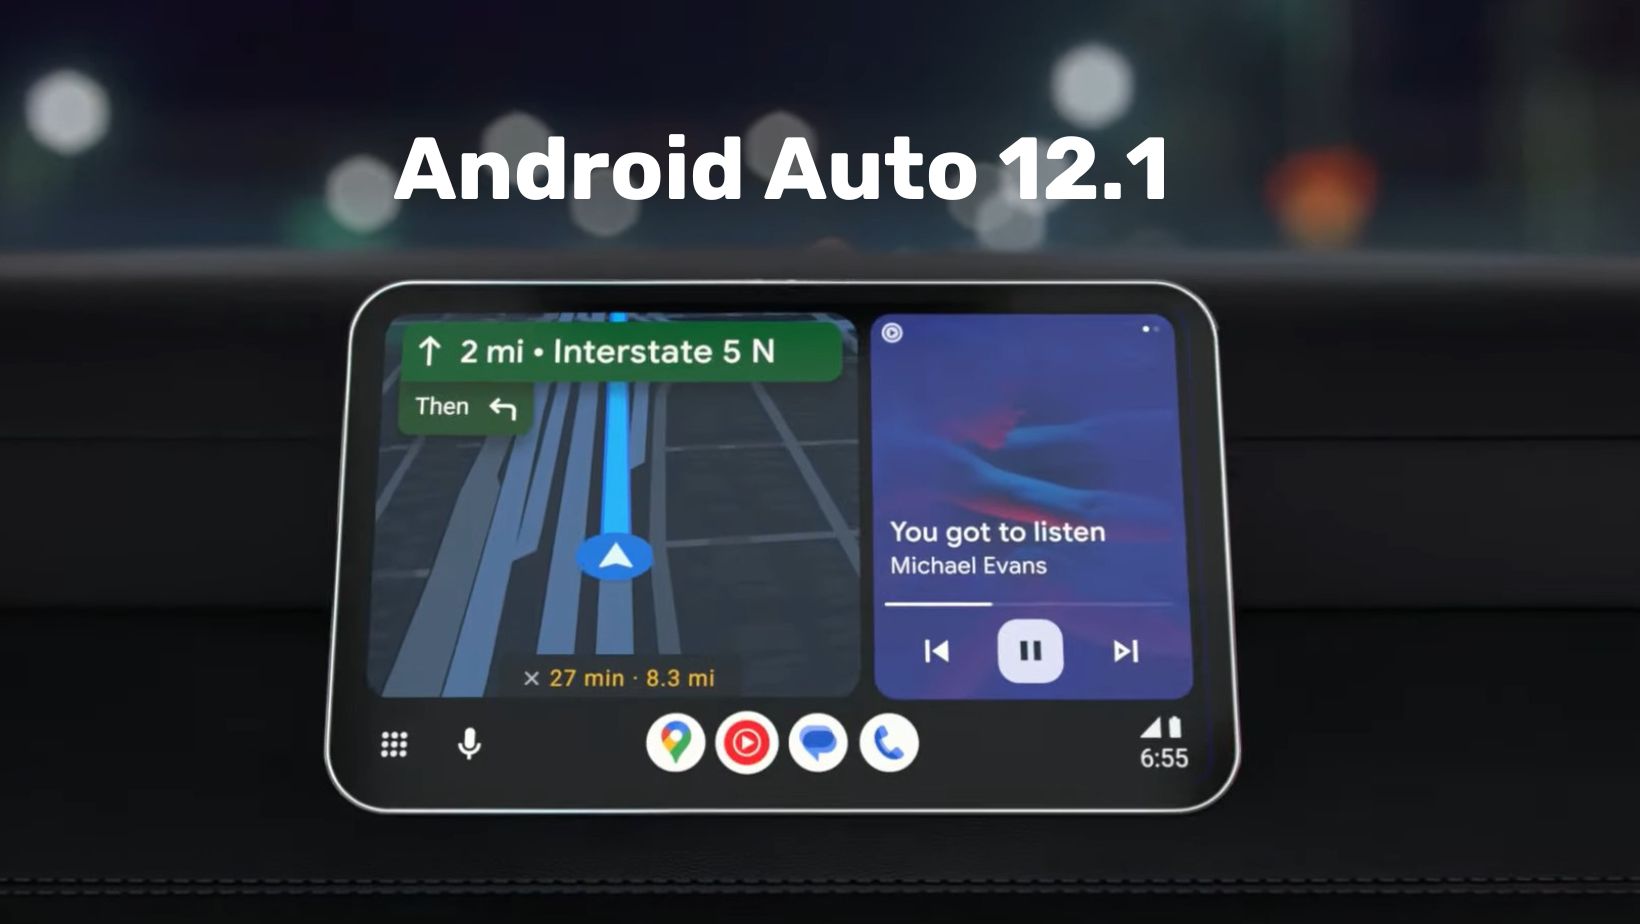 Android Auto 12.1 APK Pushed to Stable Channel [Download]